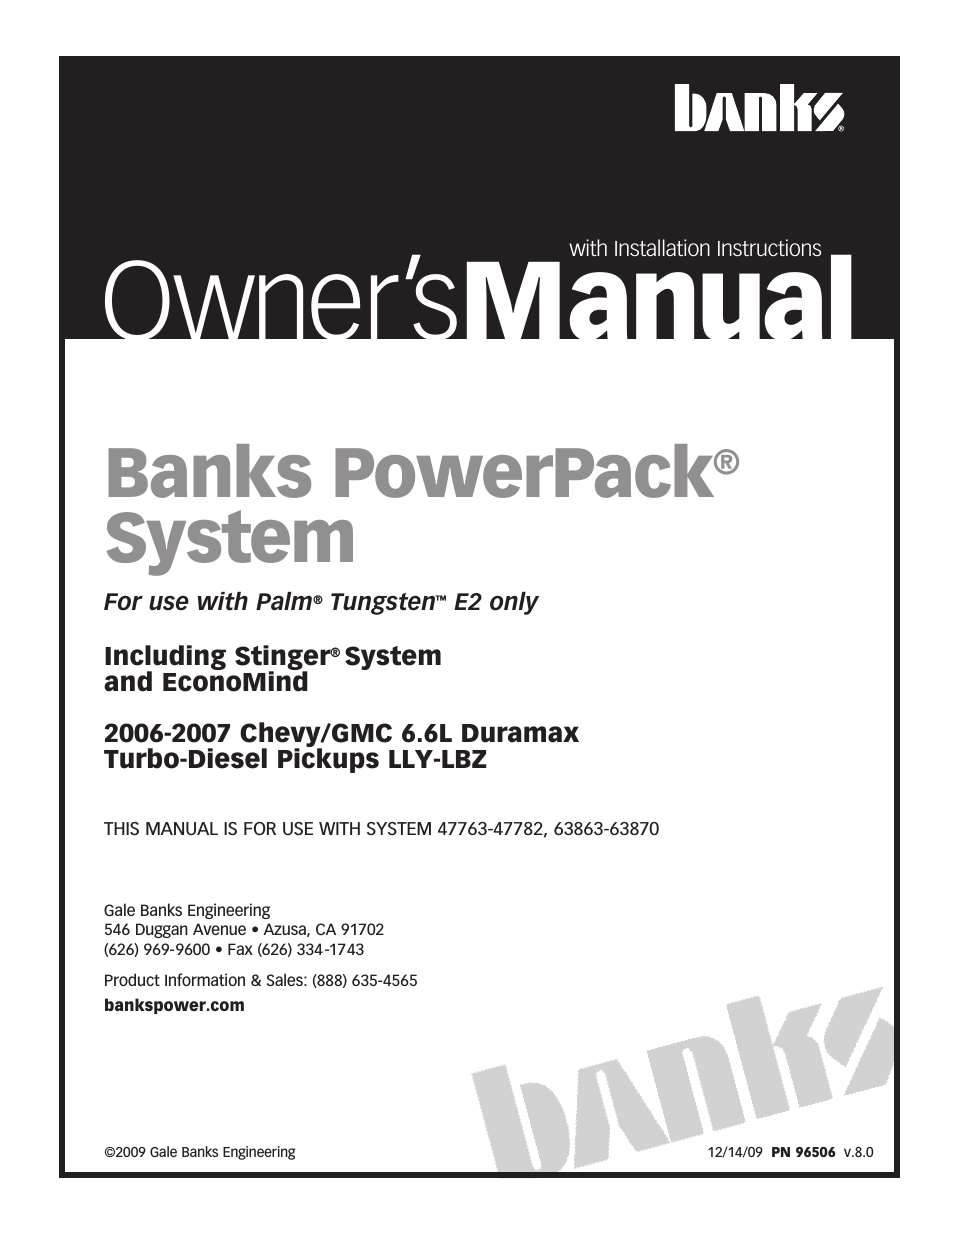 Chevy_GMC Trucks: Duramax LLY-LBZ (Diesel ’06 - 07 6.6L) Power Systems- PowerPack & Stinger Systems w Economind (LLY & LBZ) '06-07 (PDA) Compatible w_ Optional PowerPDA